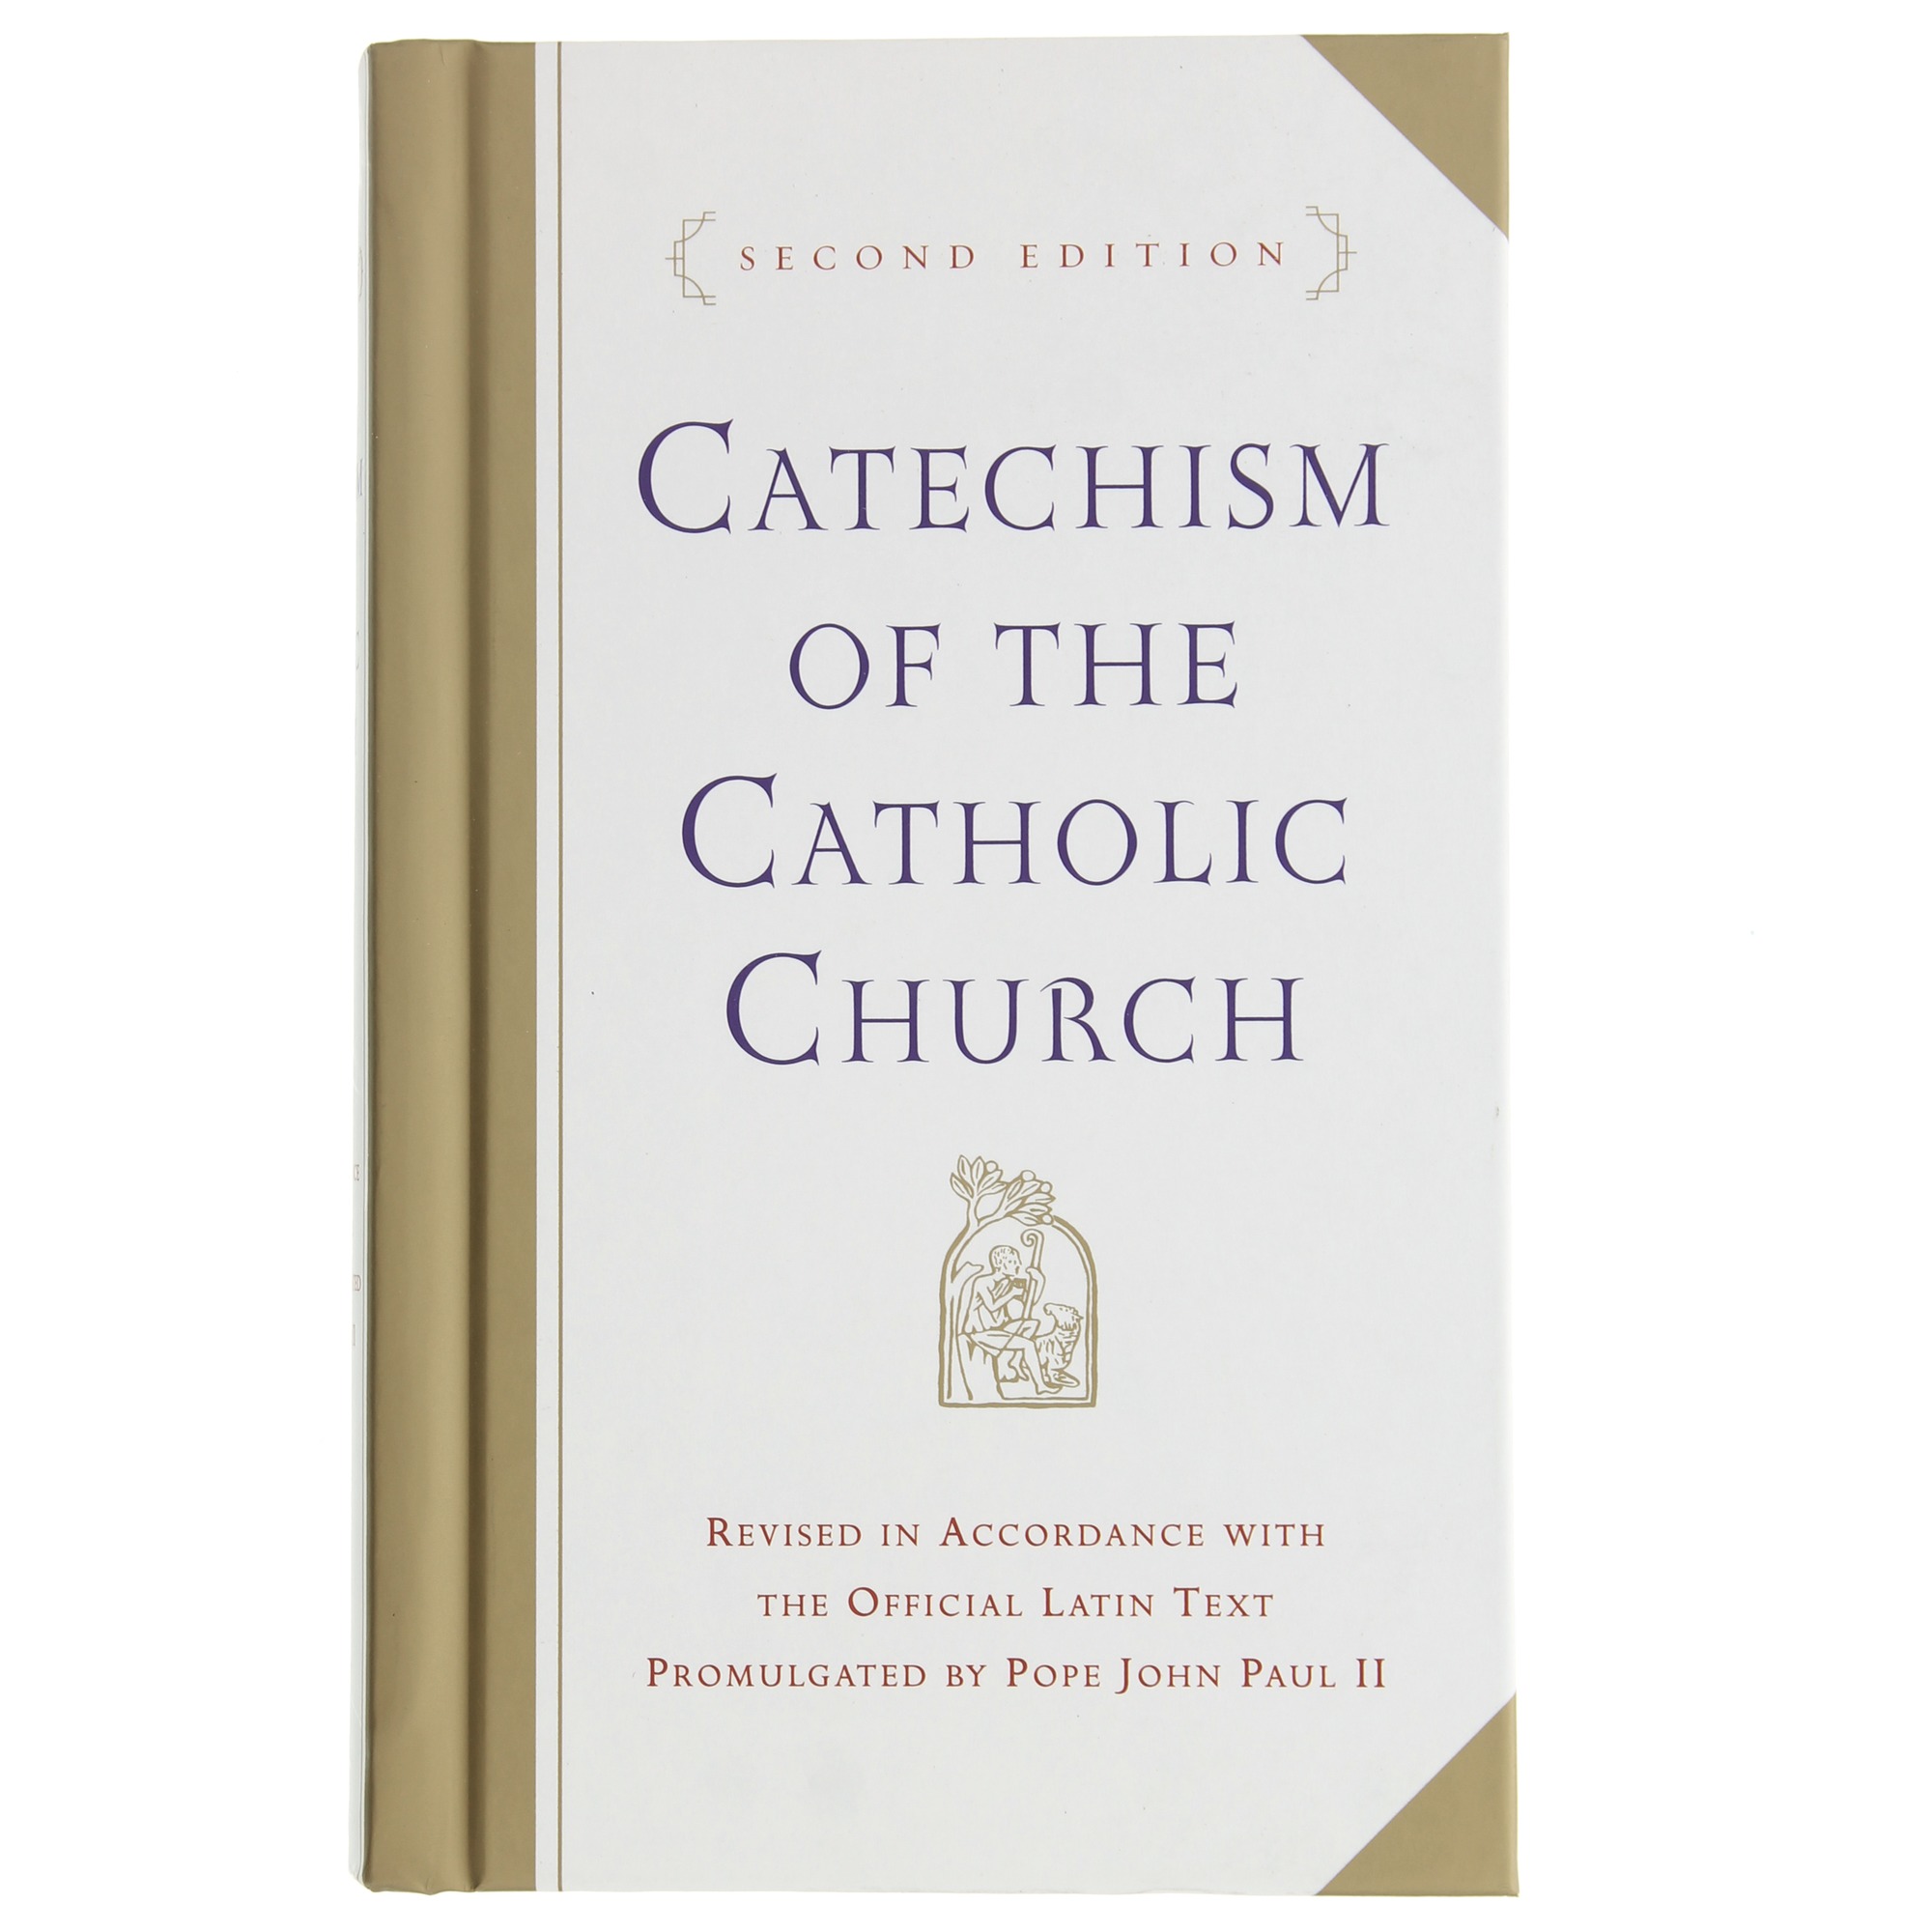 The Catechism of the Catholic Church (Second Edition)